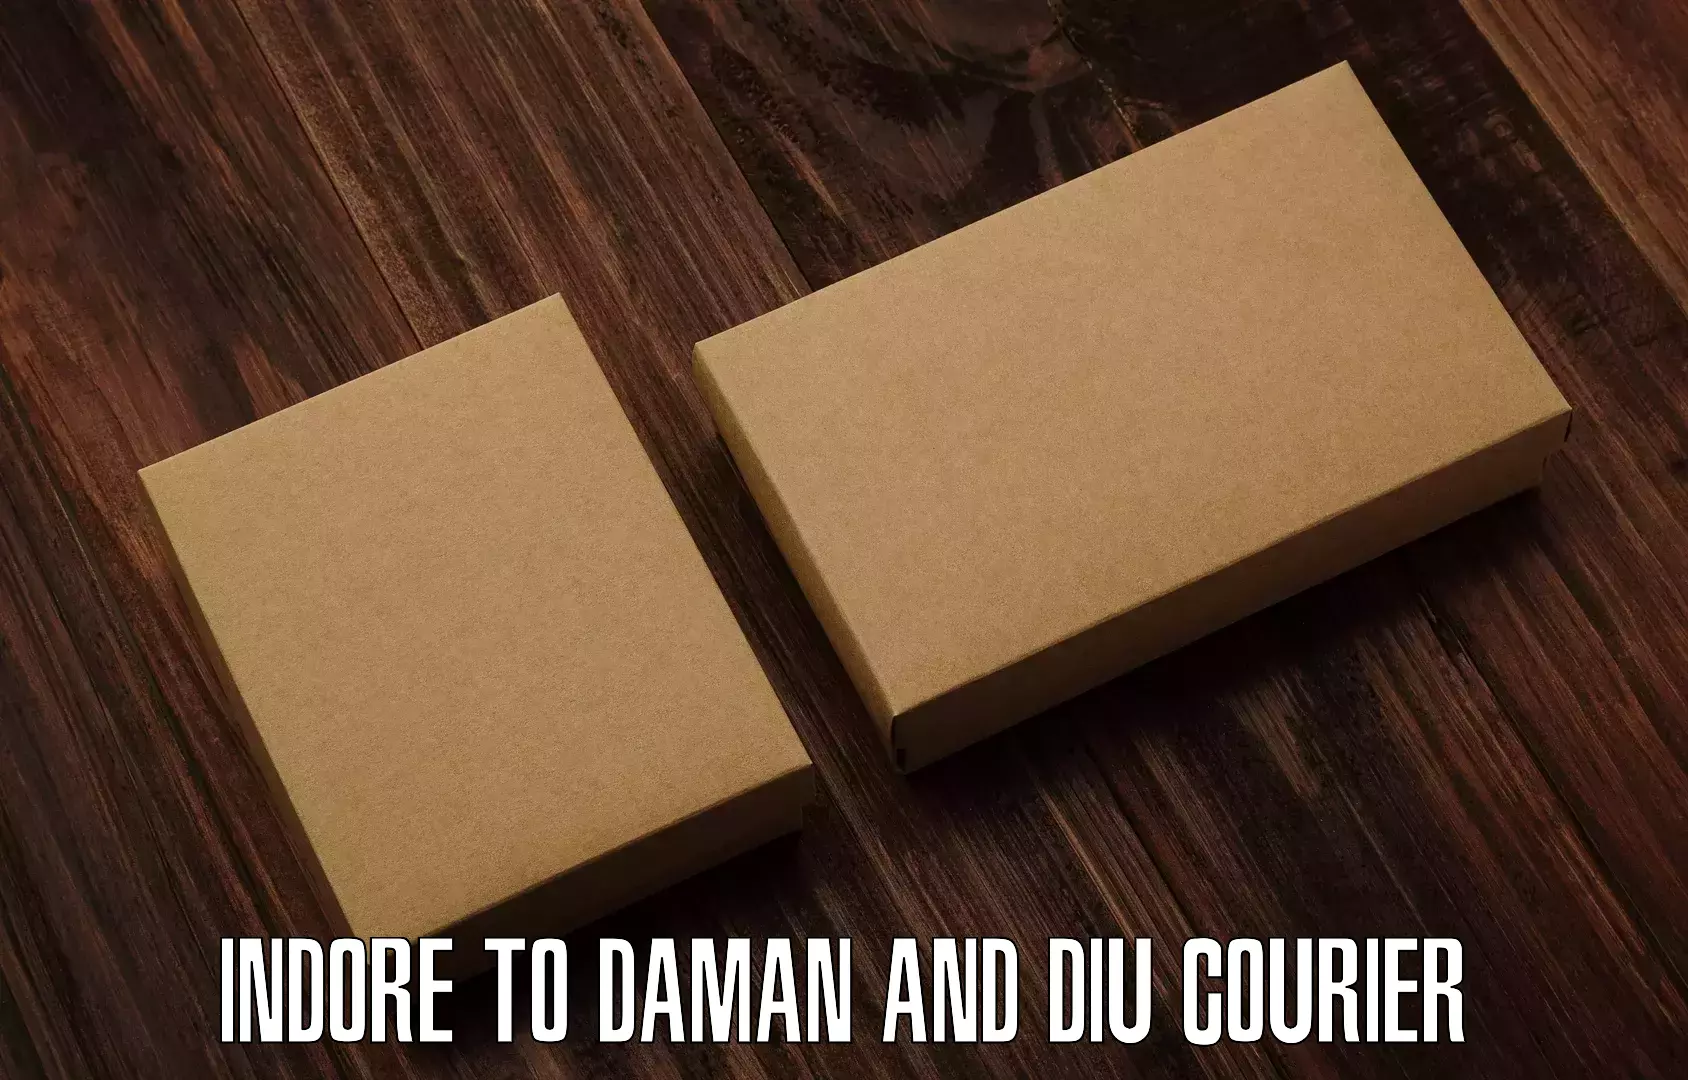 Air courier services Indore to Daman